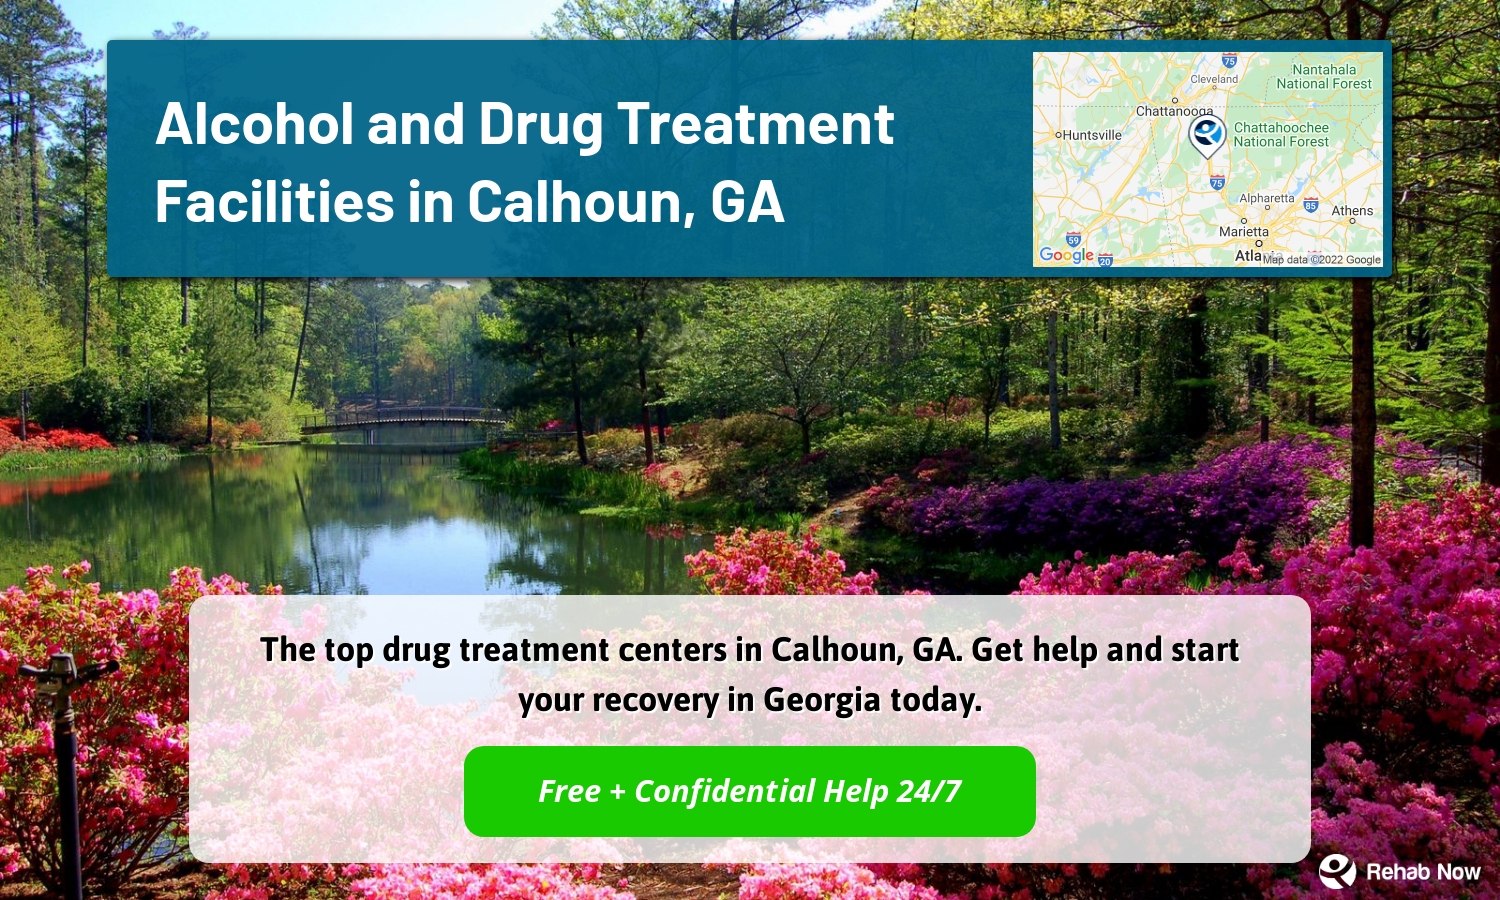 The top drug treatment centers in Calhoun, GA. Get help and start your recovery in Georgia today.